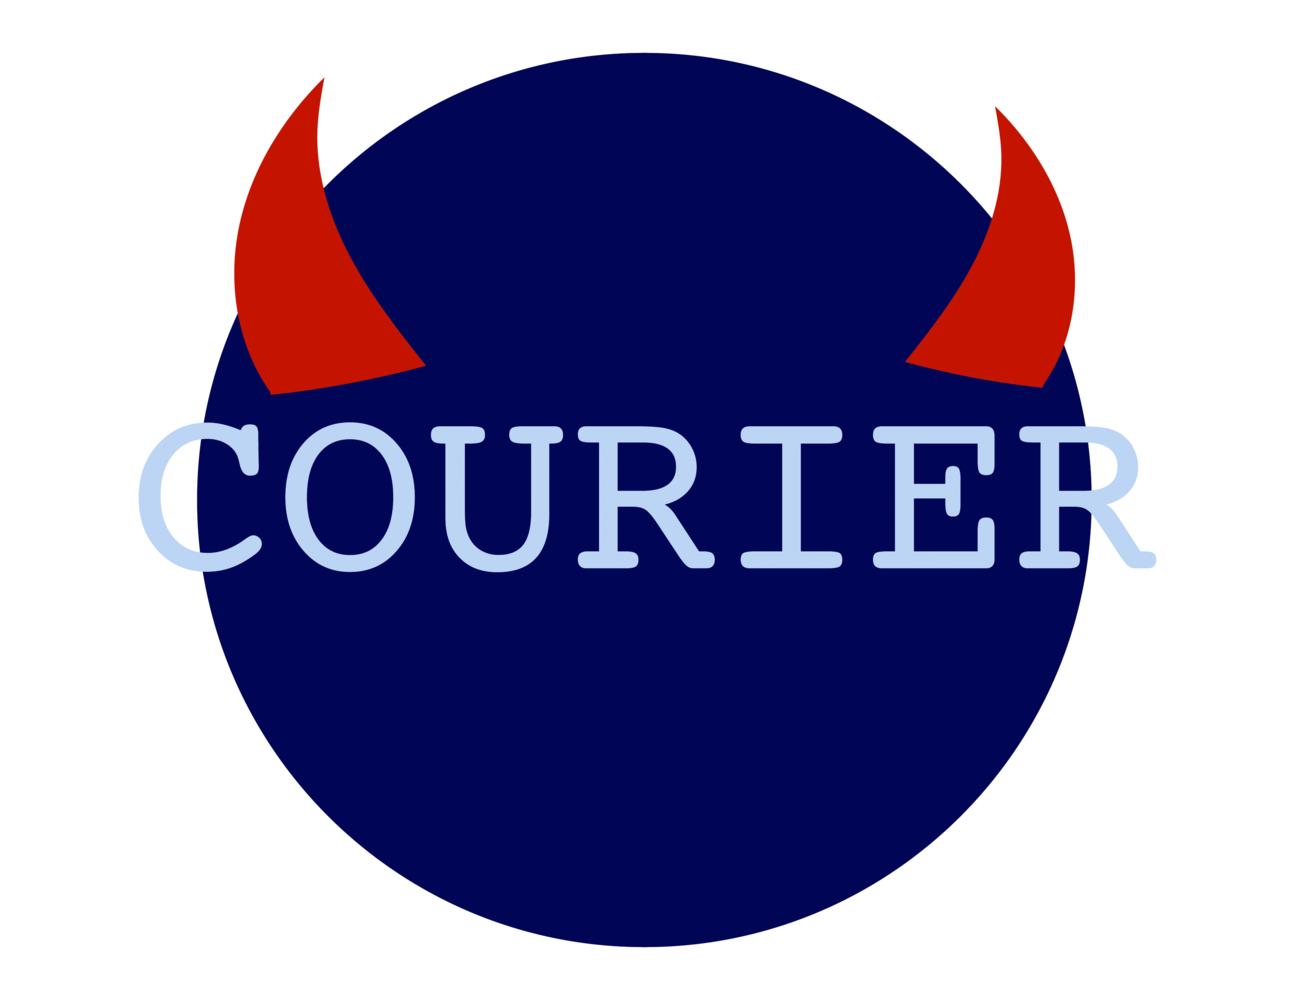 Is Courier the font of the devil? Discuss